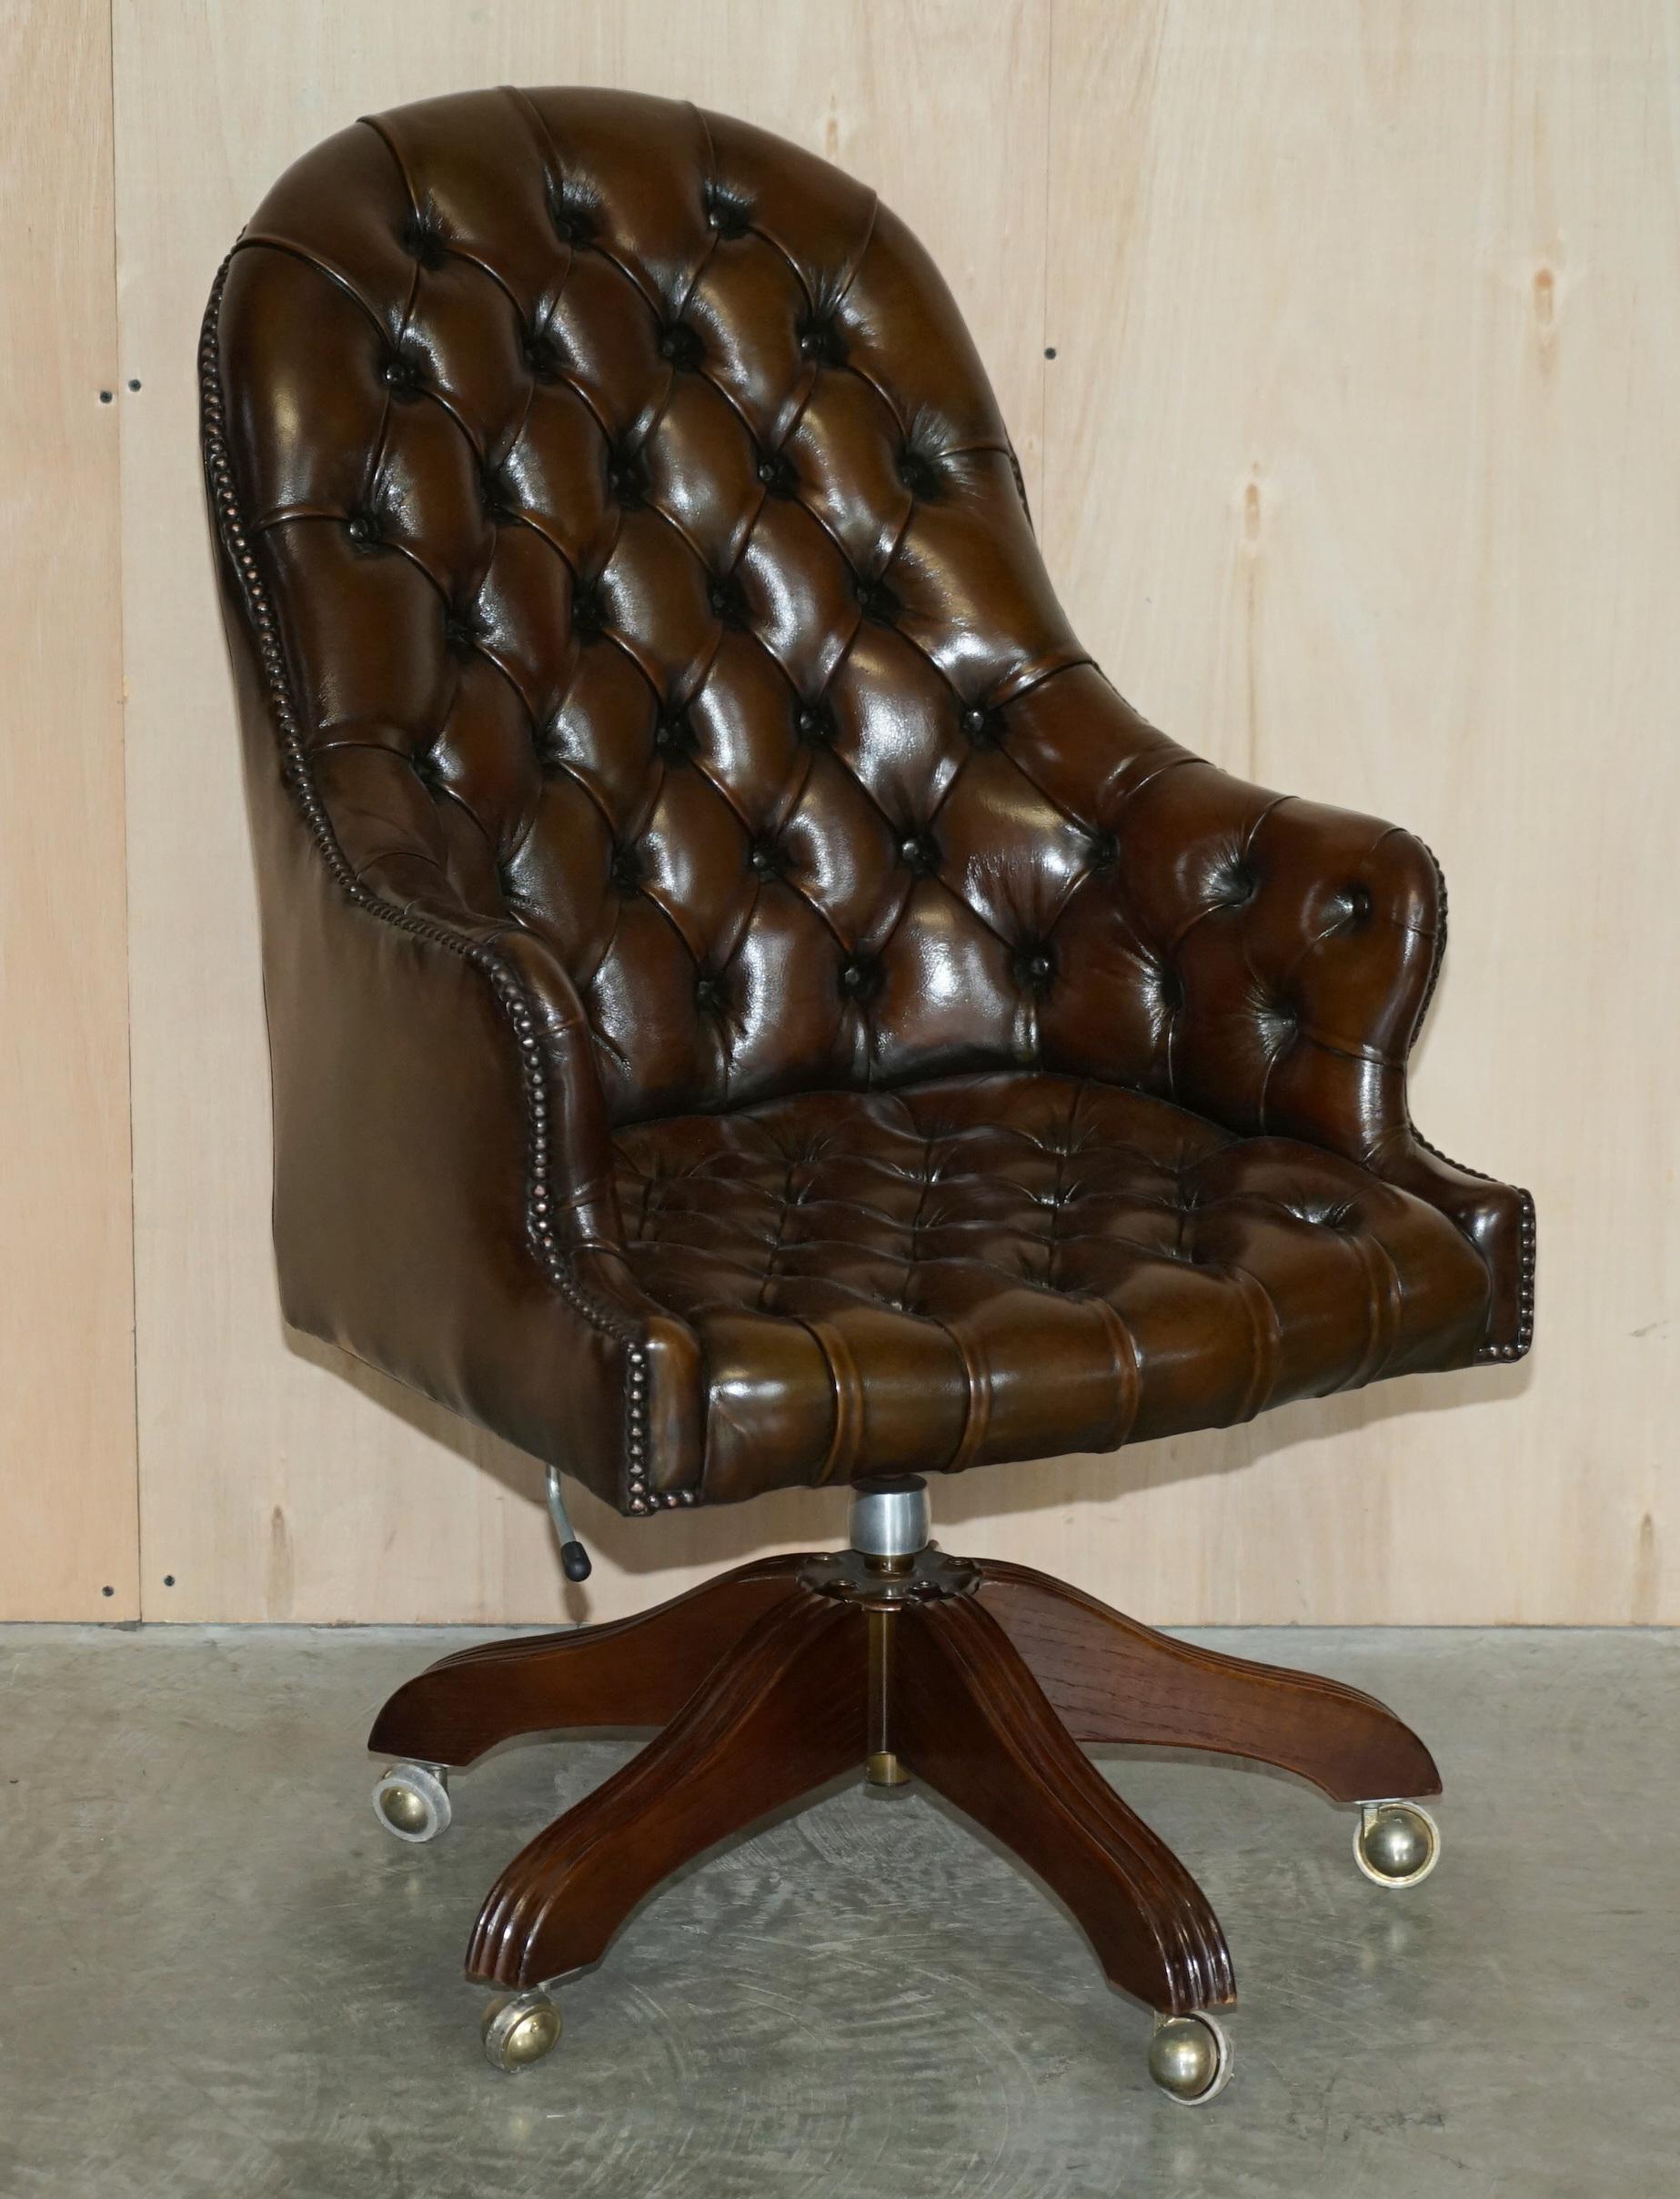 We are delighted to offer 1 of 2, hand made in England by Wade Upholstery, fully restored original vintage hand dyed cigar brown leather Chesterfield tufted director’s chairs

This sale is for one chair with the option to buy the pair, to confirm